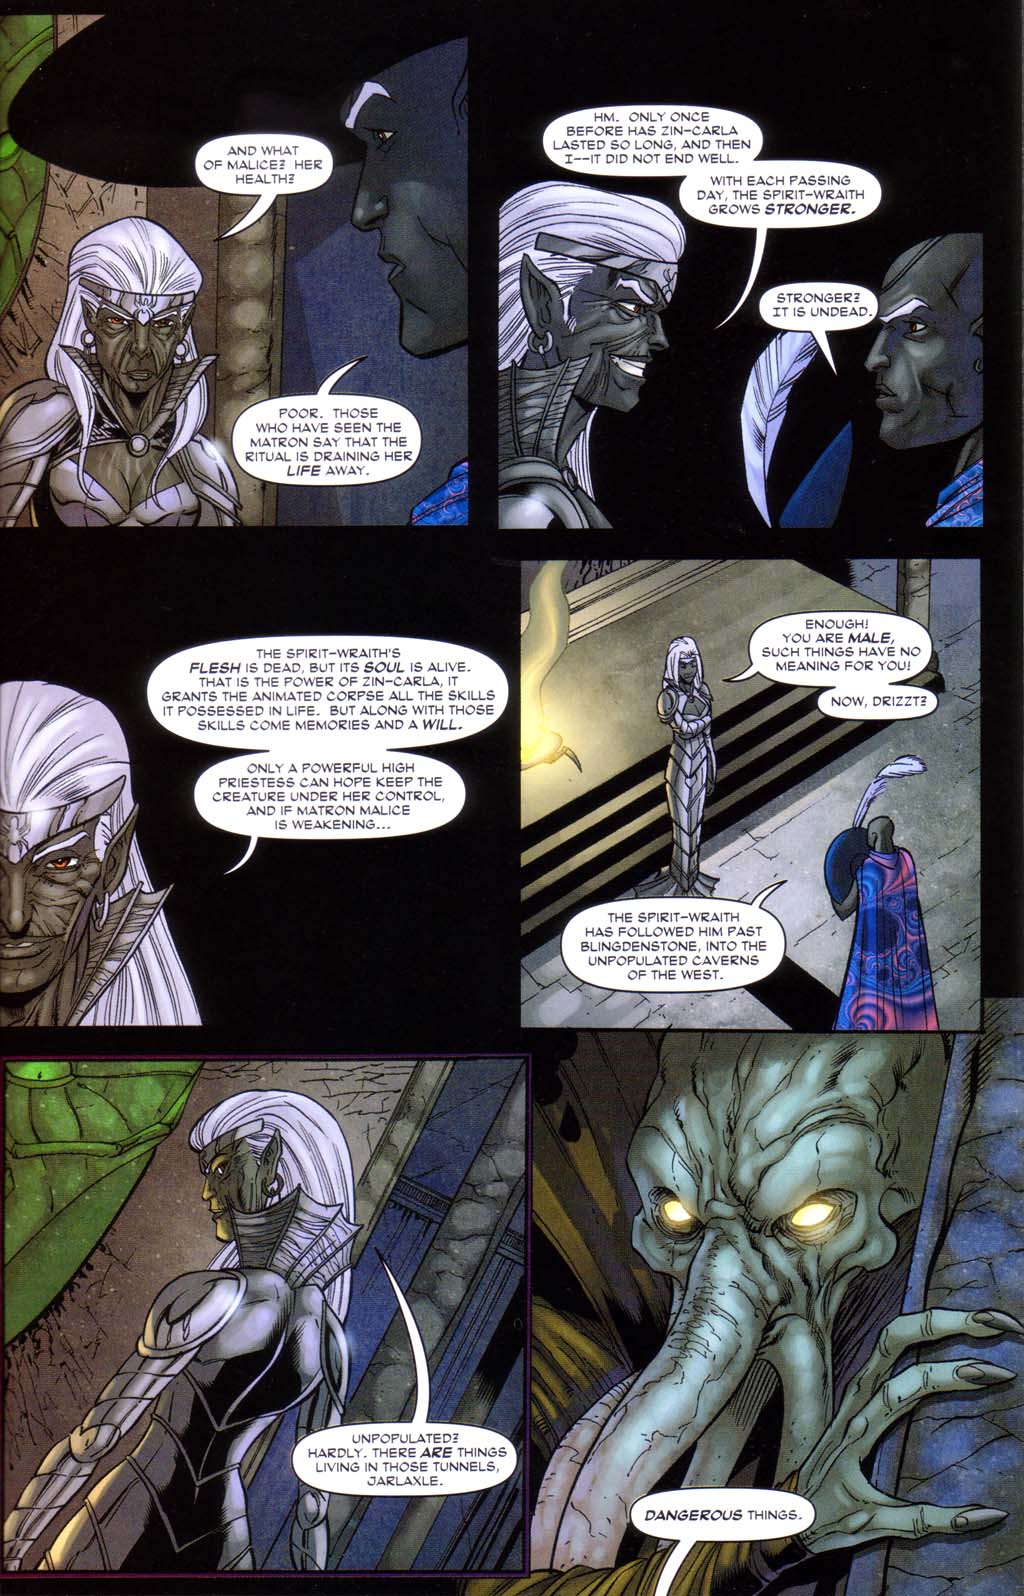 Forgotten Realms: Exile #2 - Issue #2, Part 2